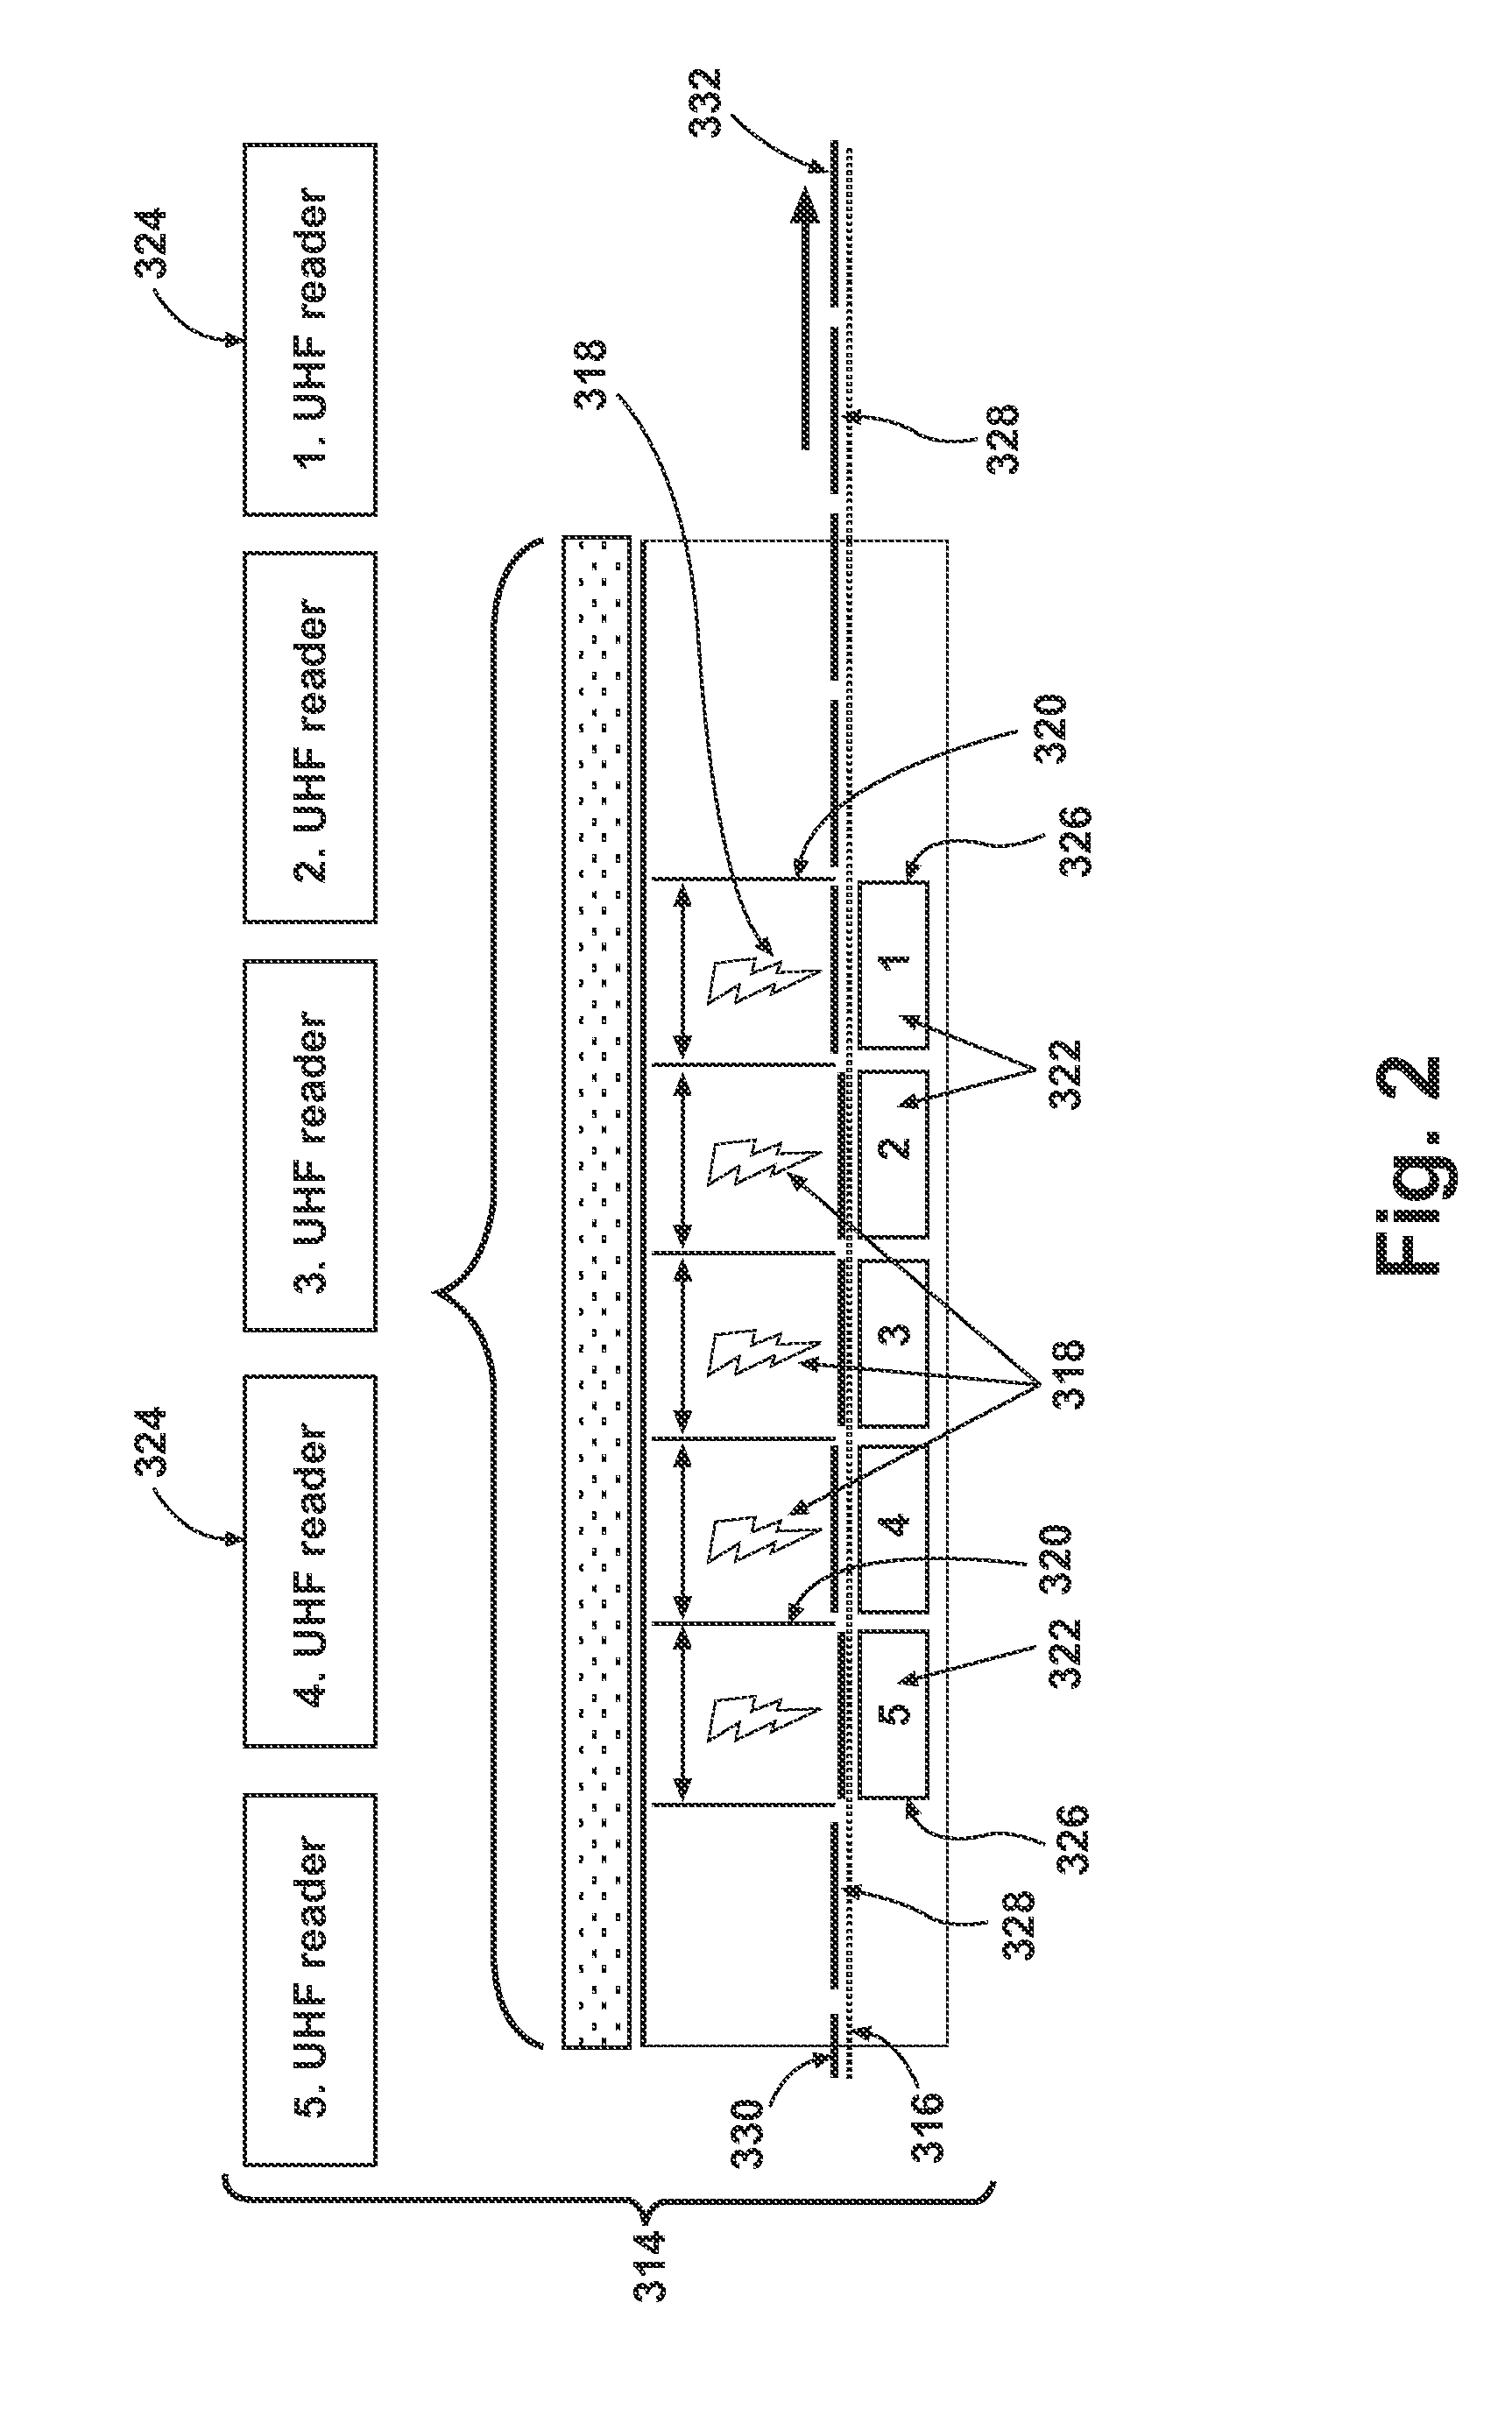 System for associating RFID tag with UPC code, and validating associative encoding of same